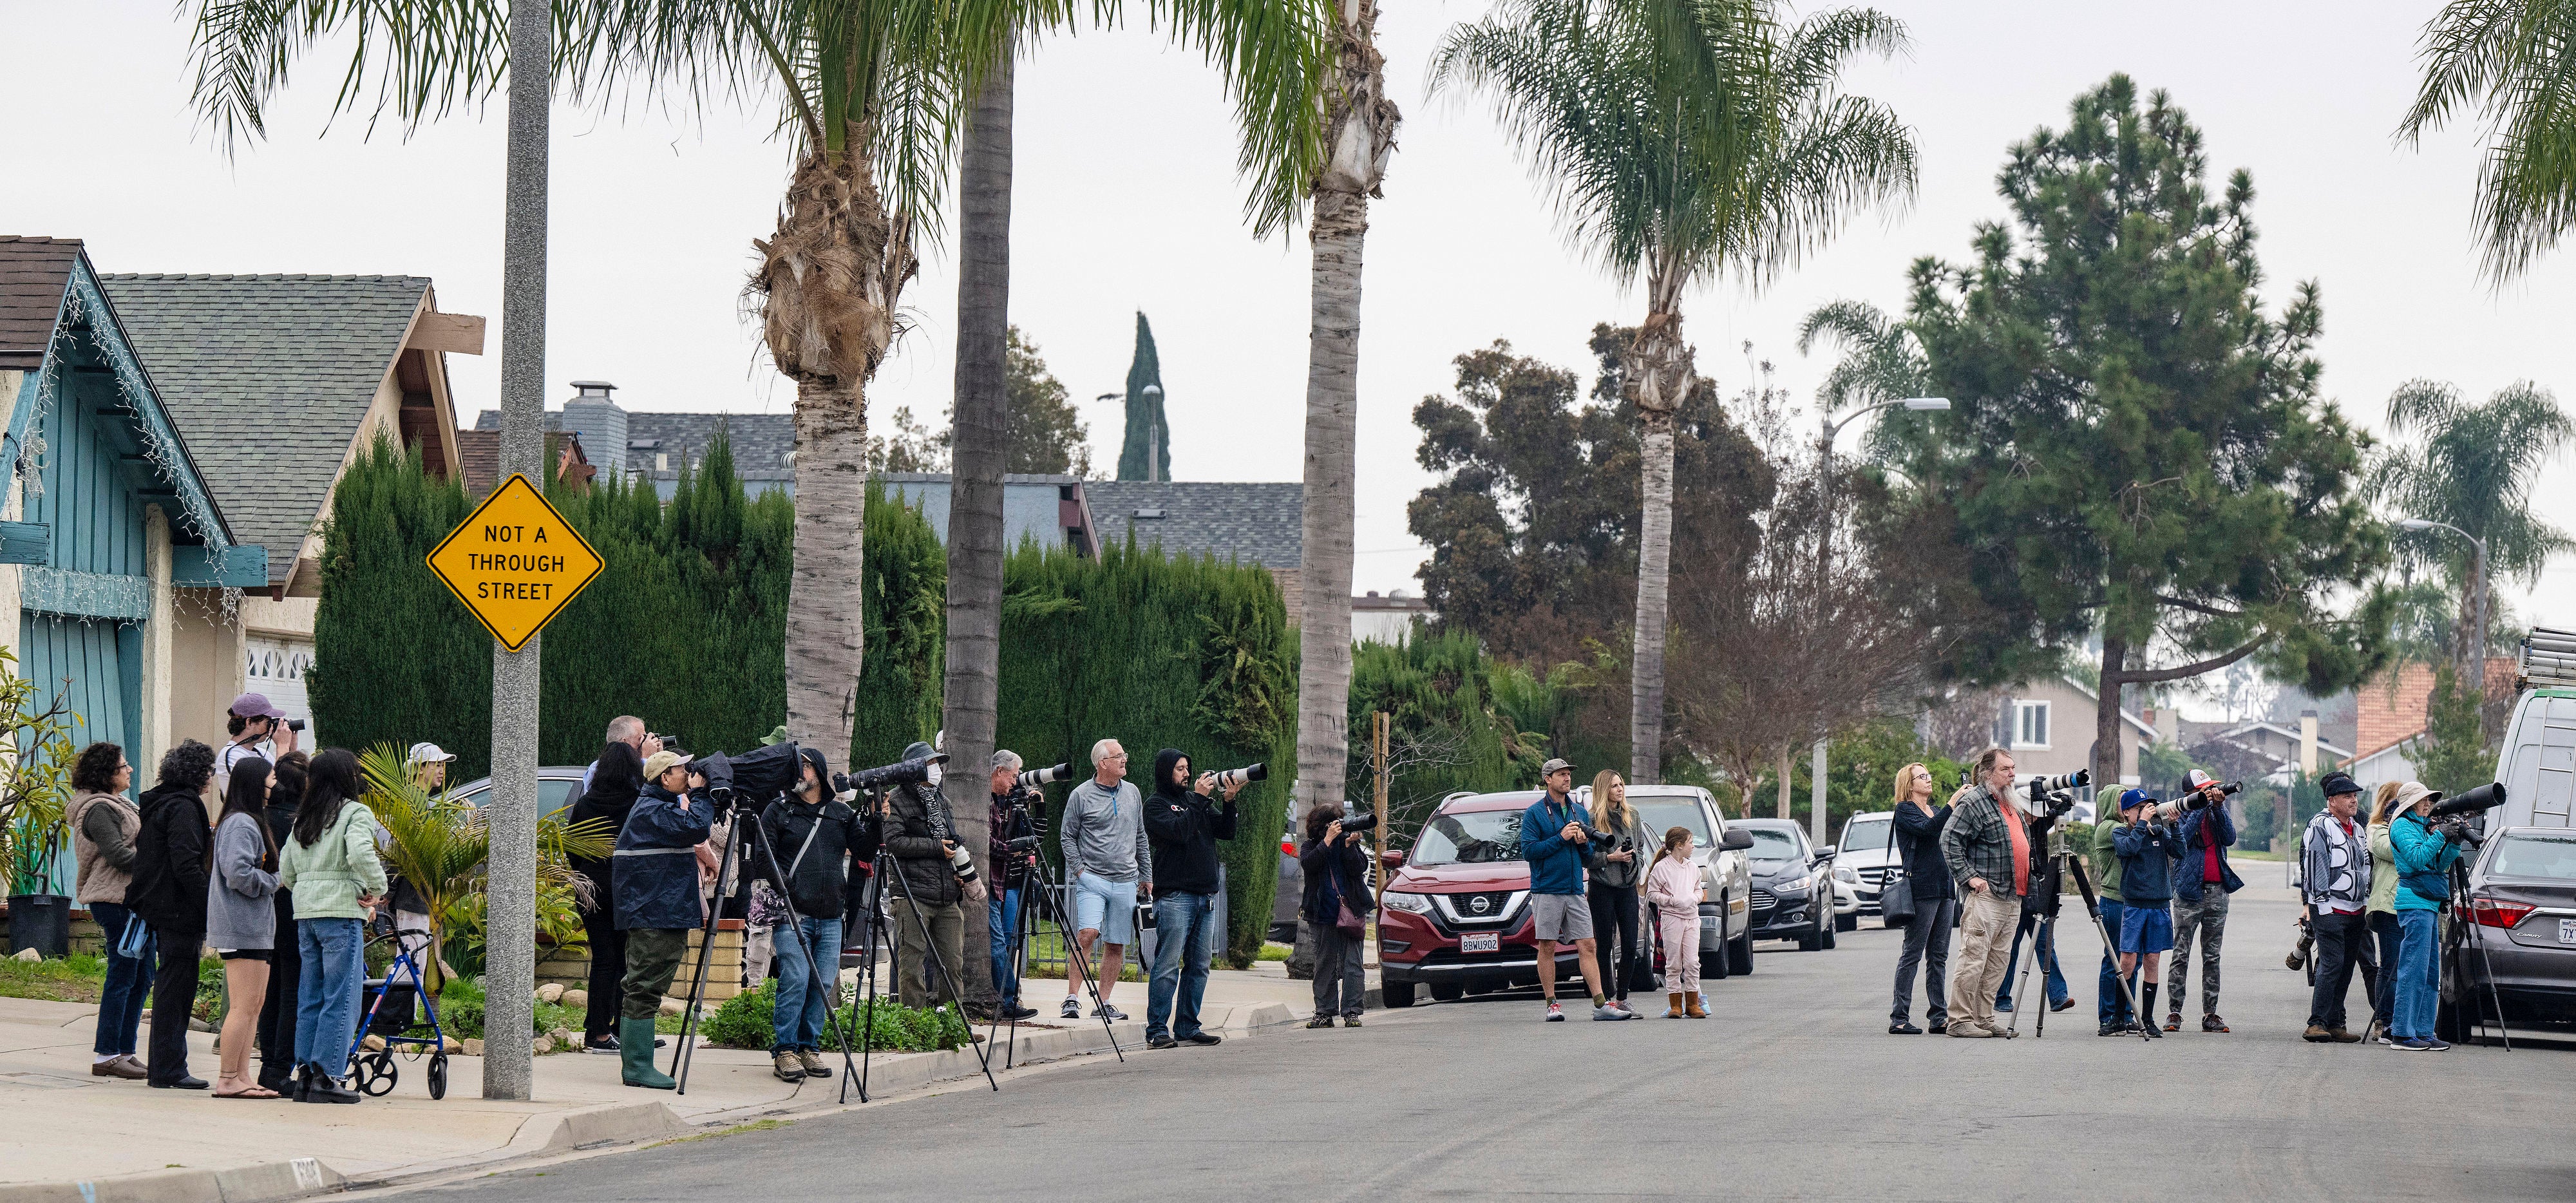 Bird watchers and photographers gather on a street in Cypress, California, to see a snowy owl as it perches on the top of a chimney of a home